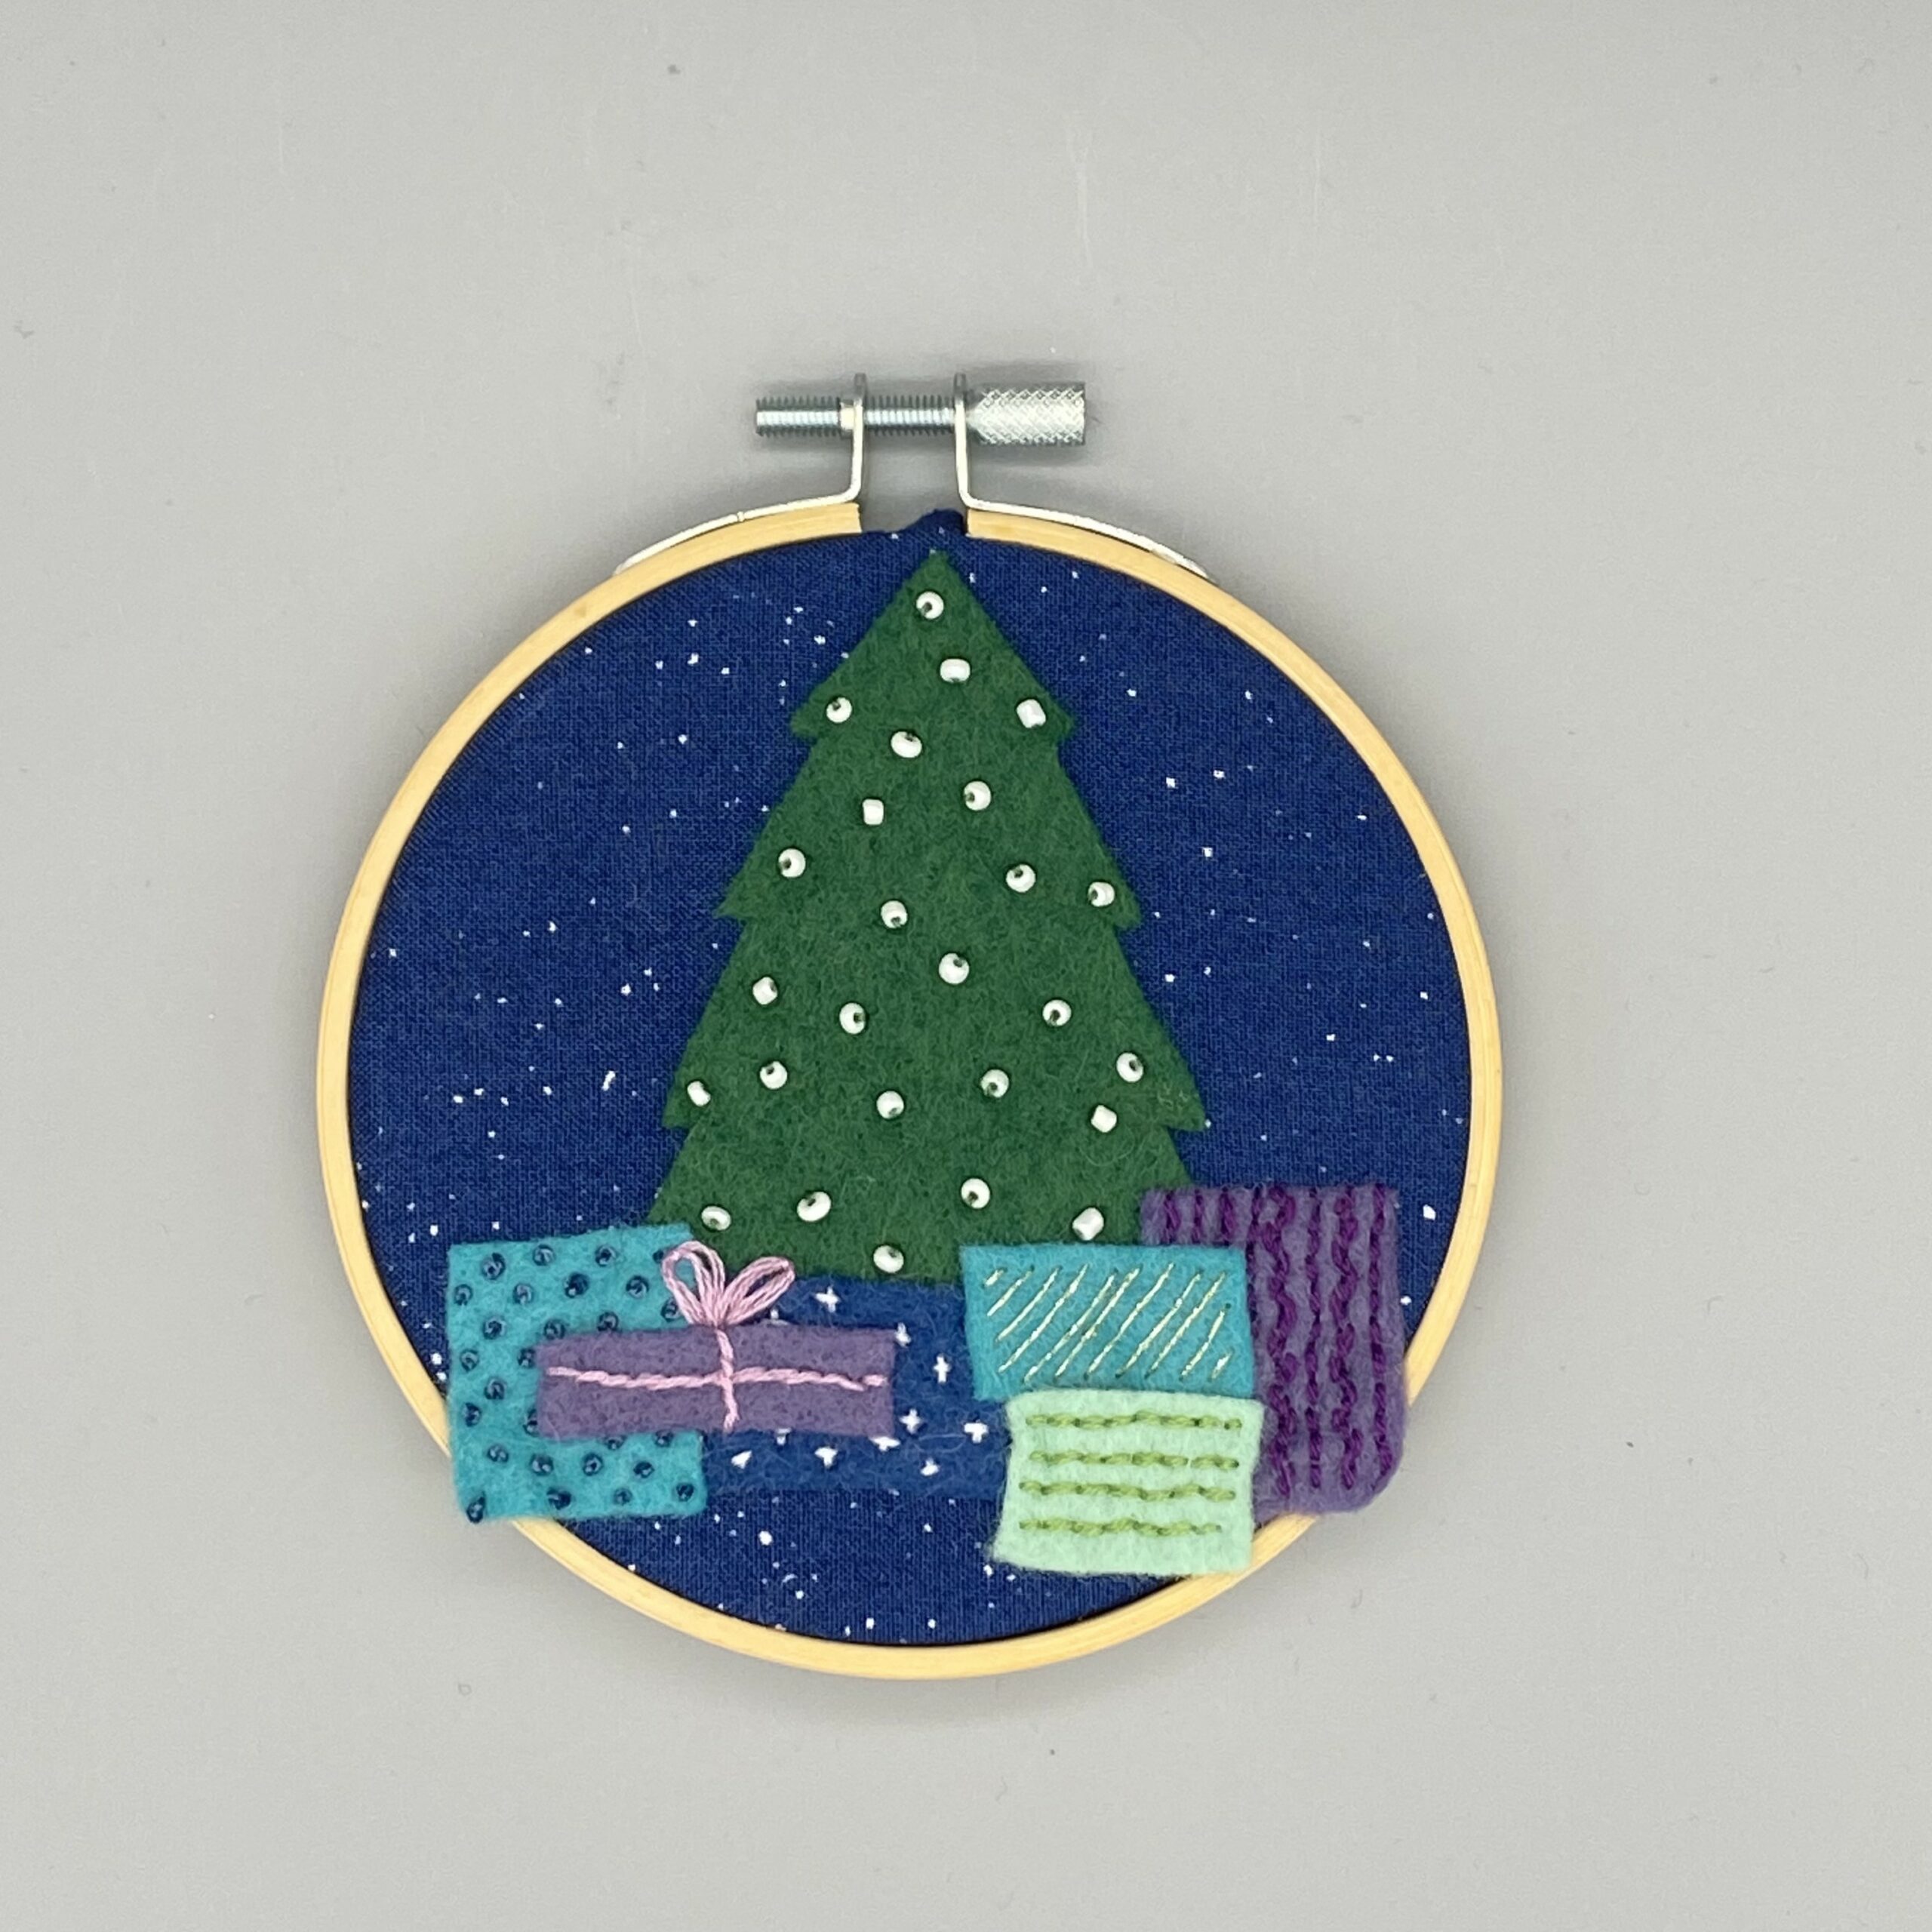 Featured image for “Christmas Tree Festive Hoop”